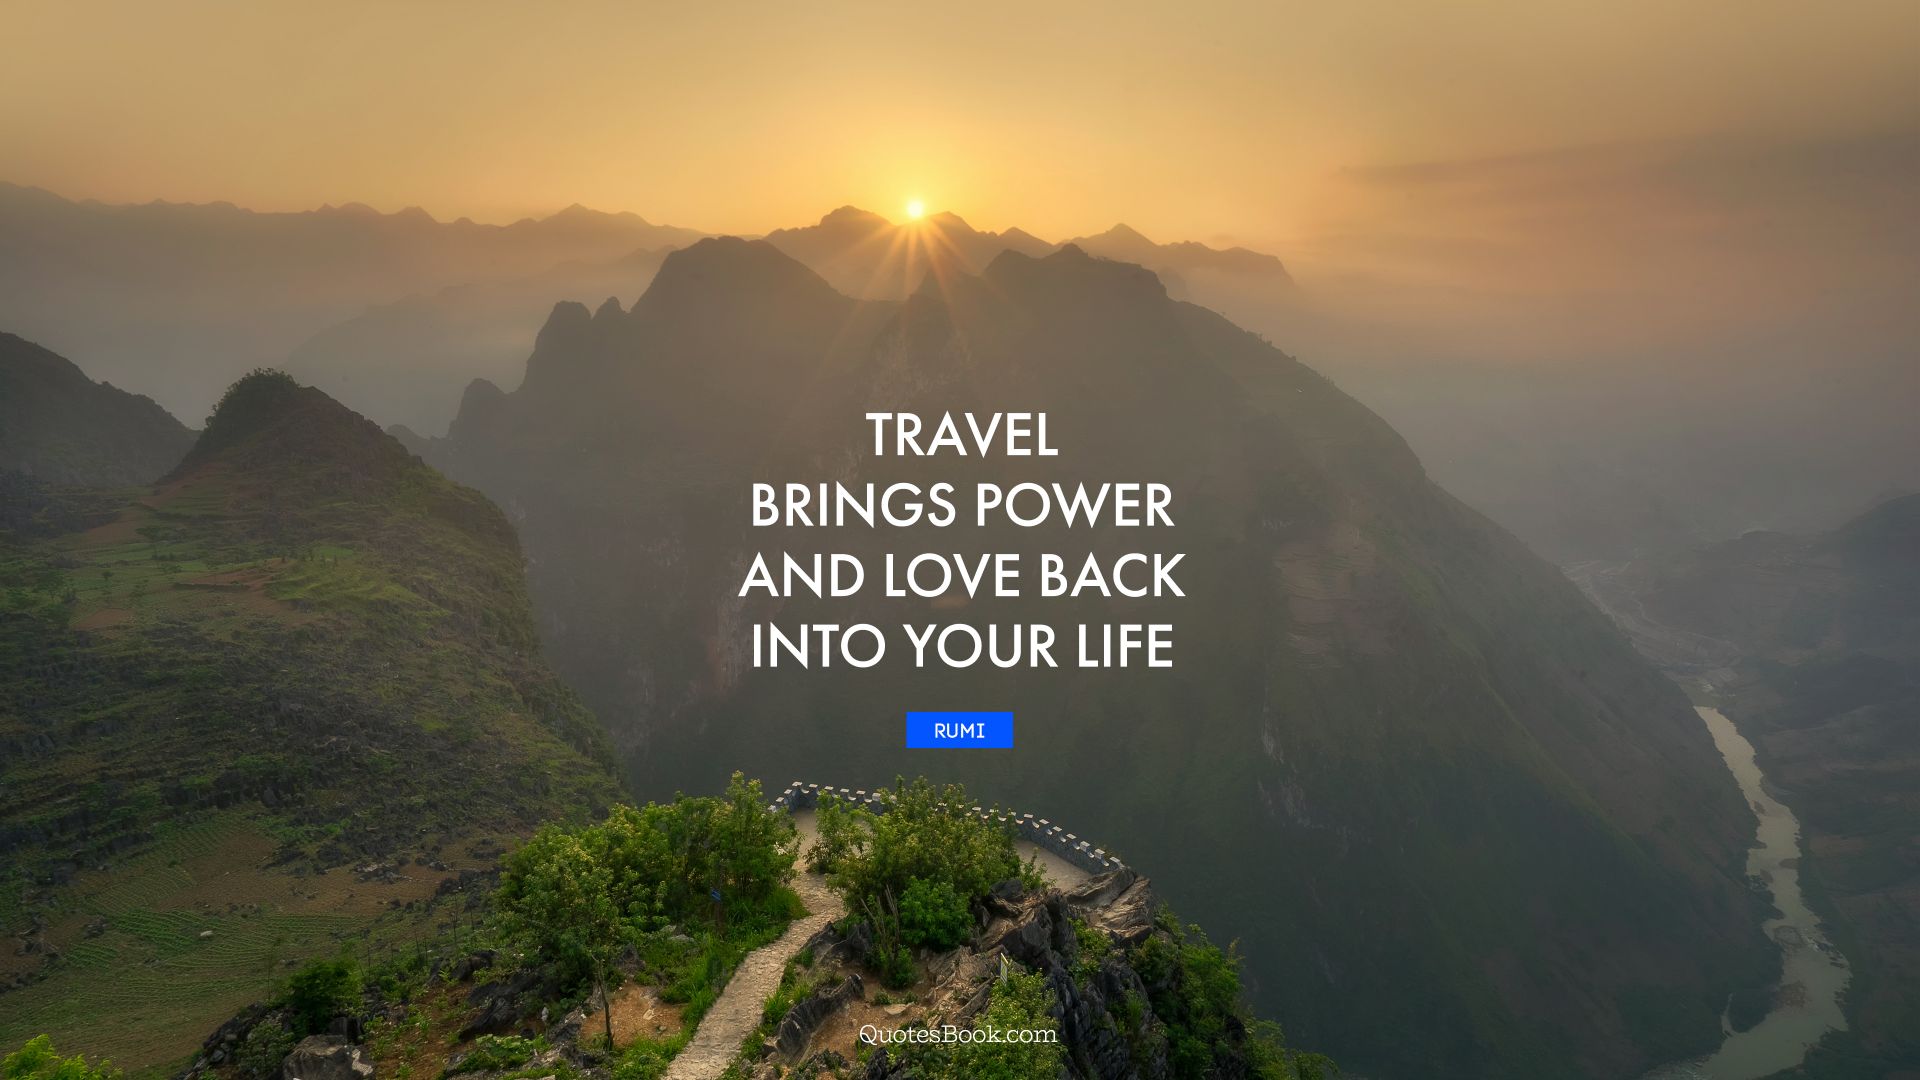 Travel brings power and love back into your life. - Quote by Rumi